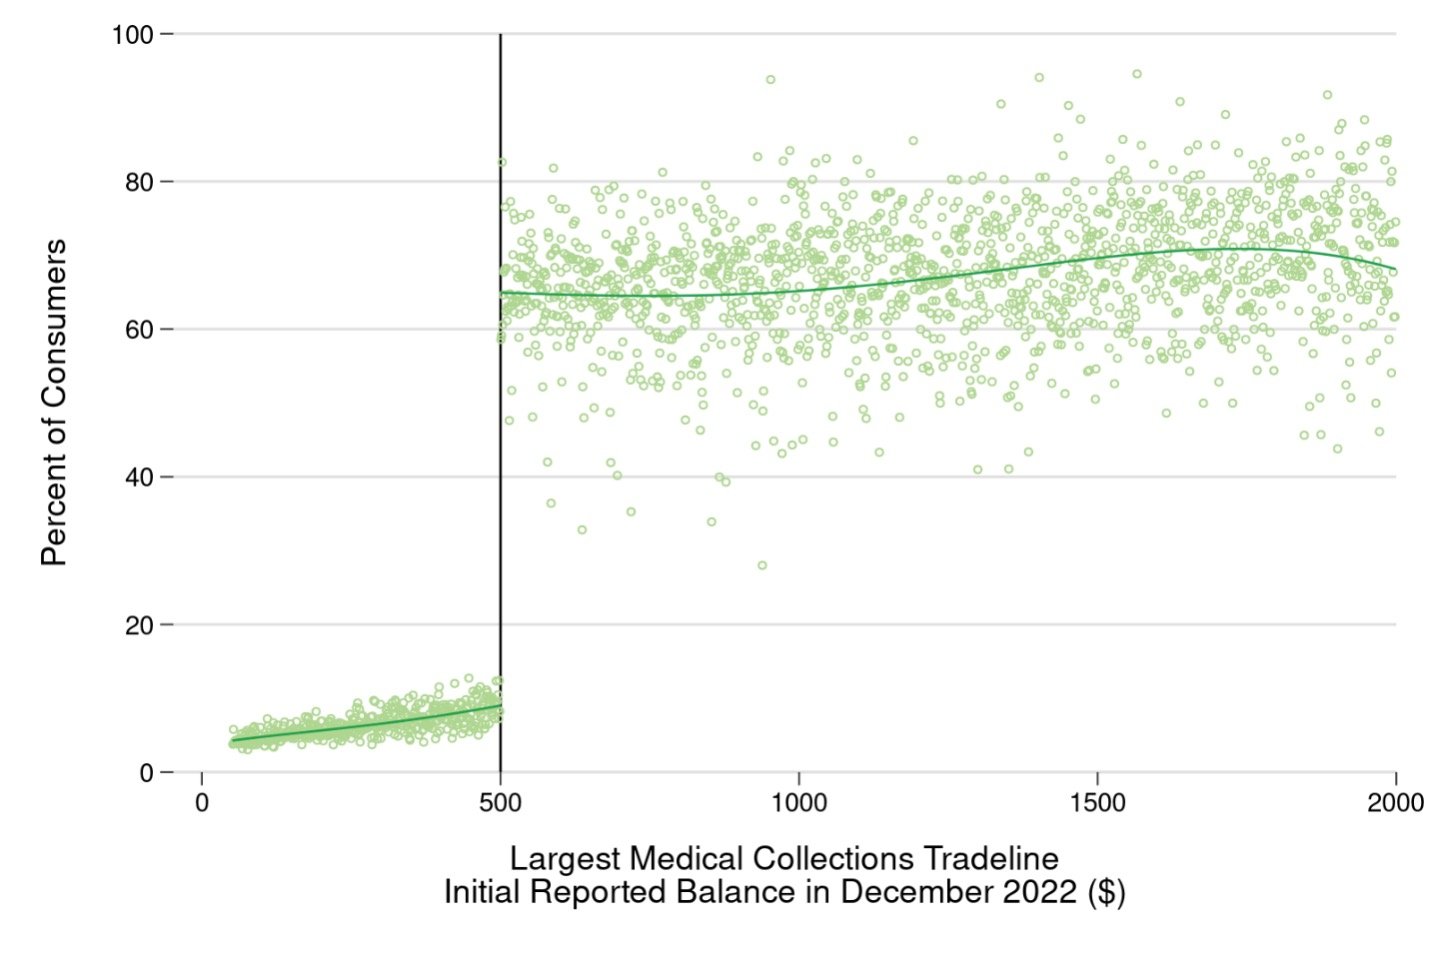 A scatterplot showing the share of consumers with medical collections tradelines on their credit reports in August 2023 on the vertical axis, with a dot for each dollar value of the highest medical collections tradeline balance in December 2022. The plot shows a thin cloud of points around five to ten percent below $500, then a jump to a wider cloud centered at about 66 percent above $500.